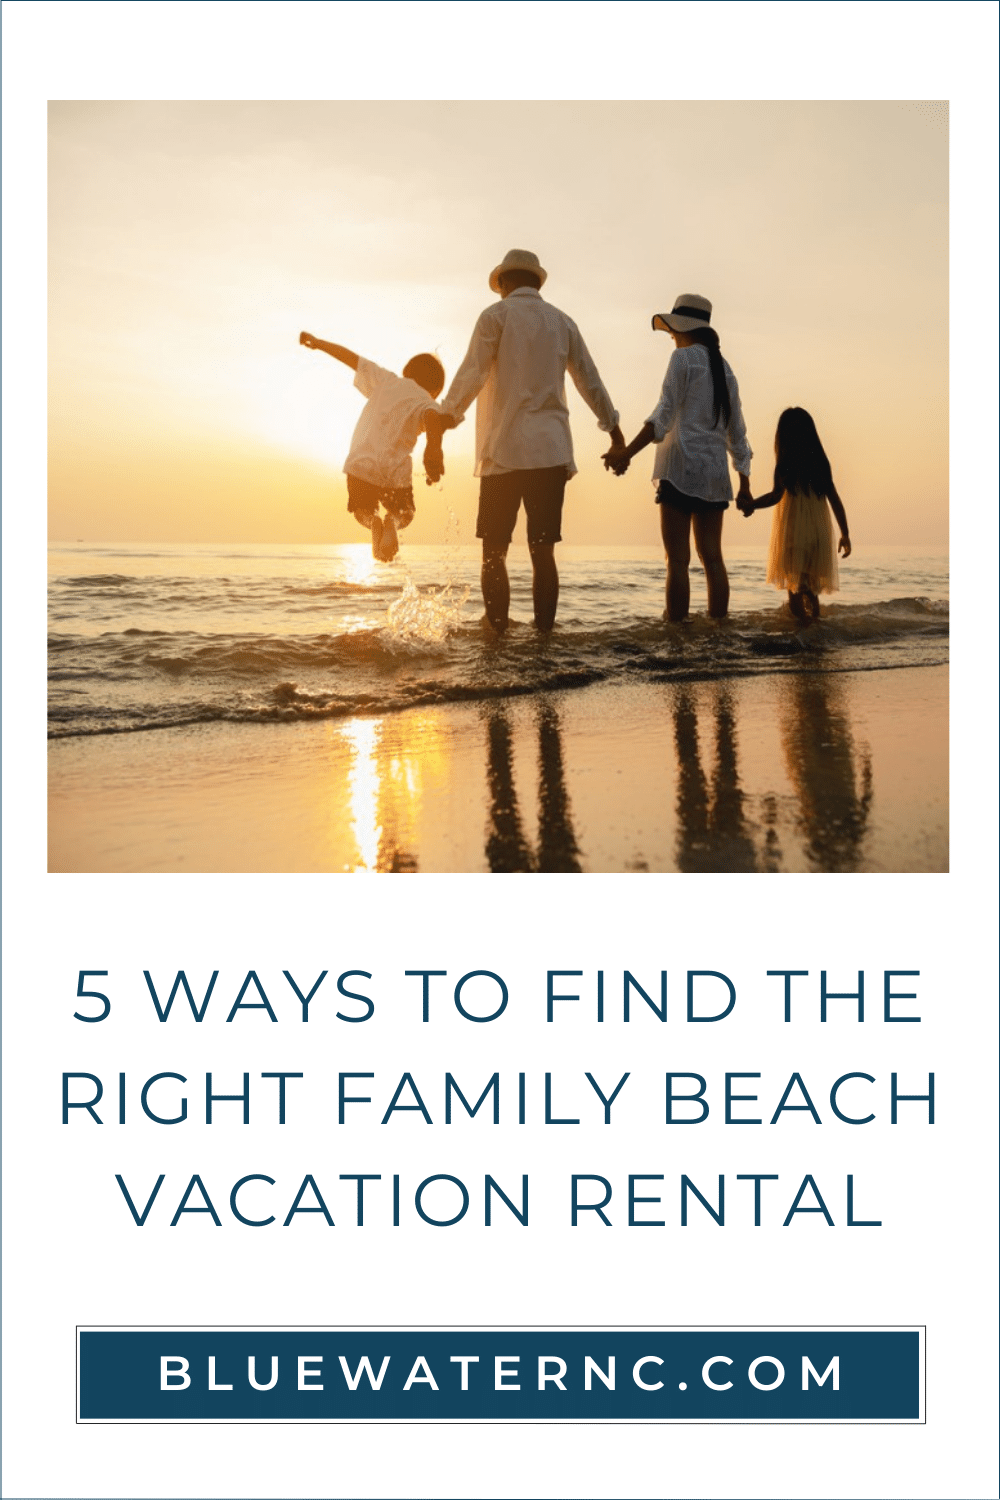 Find the perfect family beach vacation on the Crystal Coast